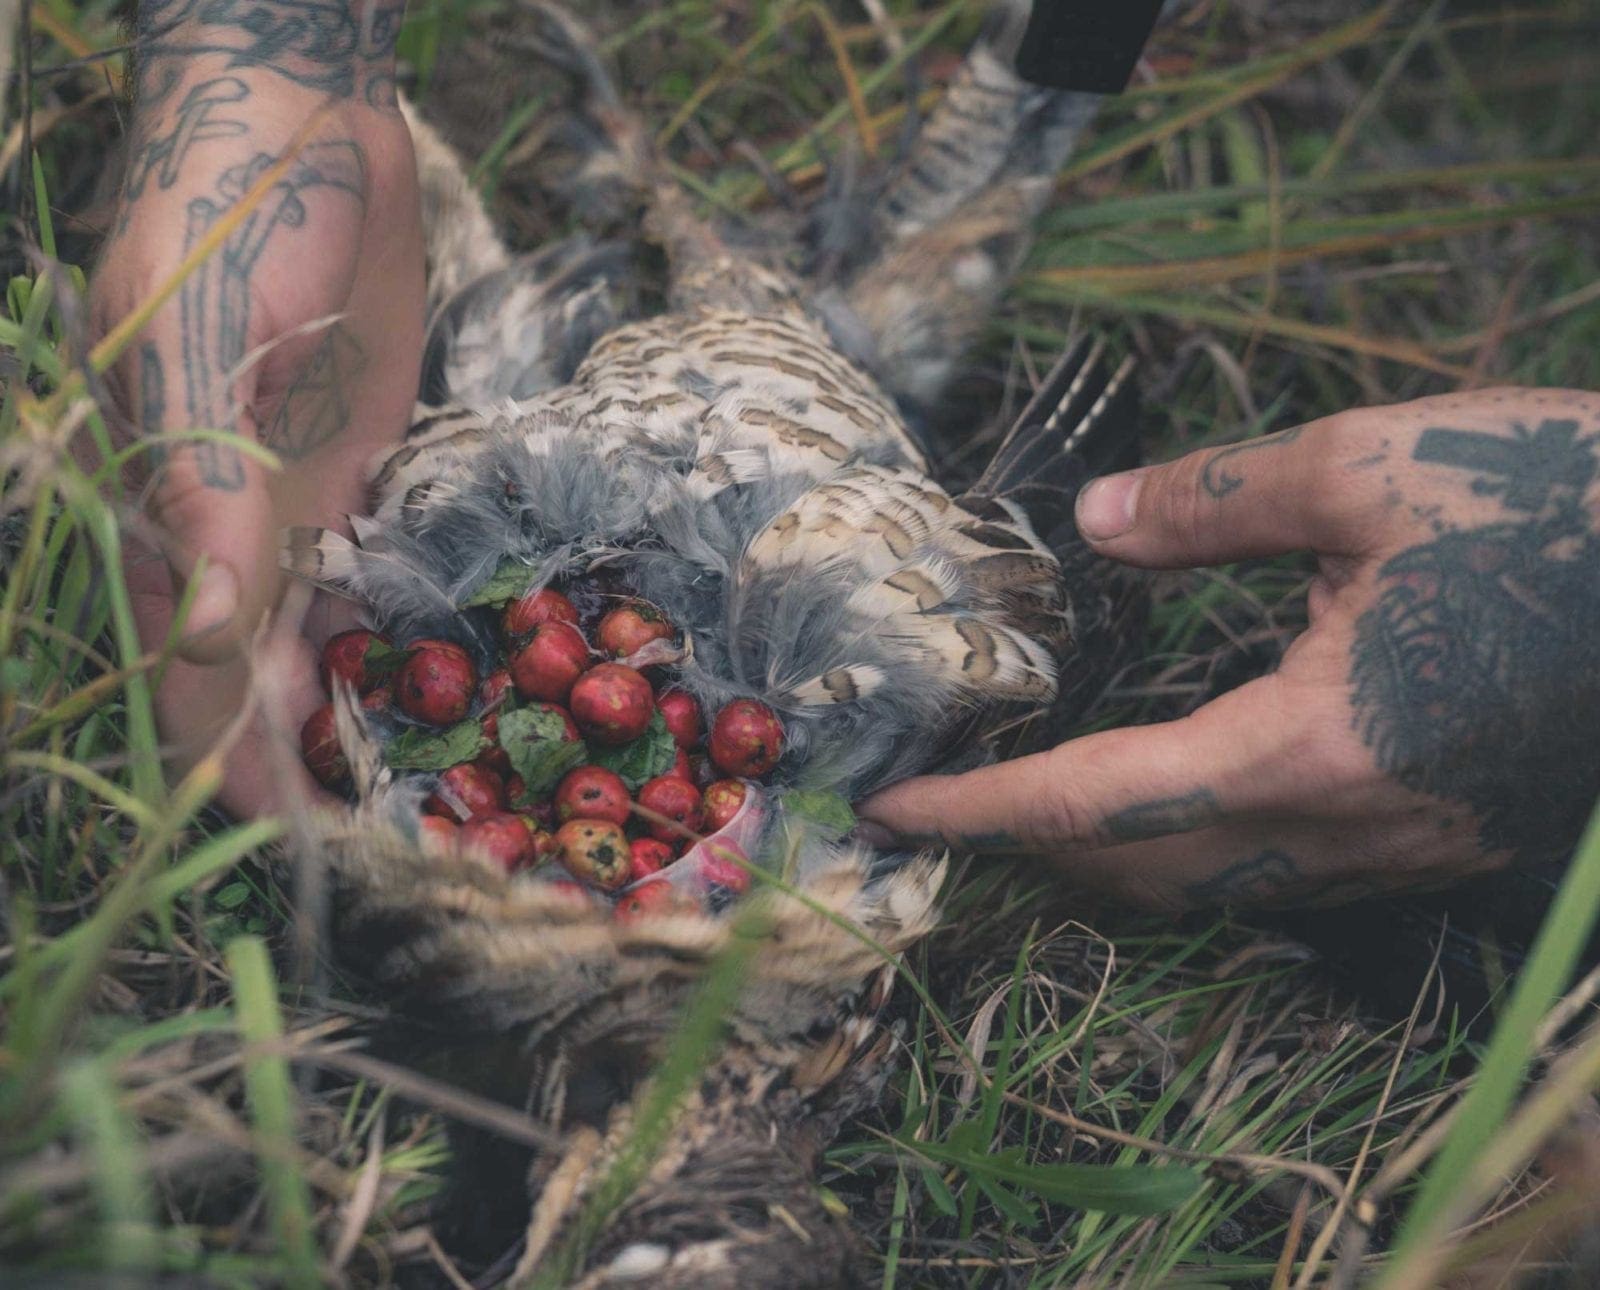 A hunter exposes the crop of a ruffed grouse to see what it was eating